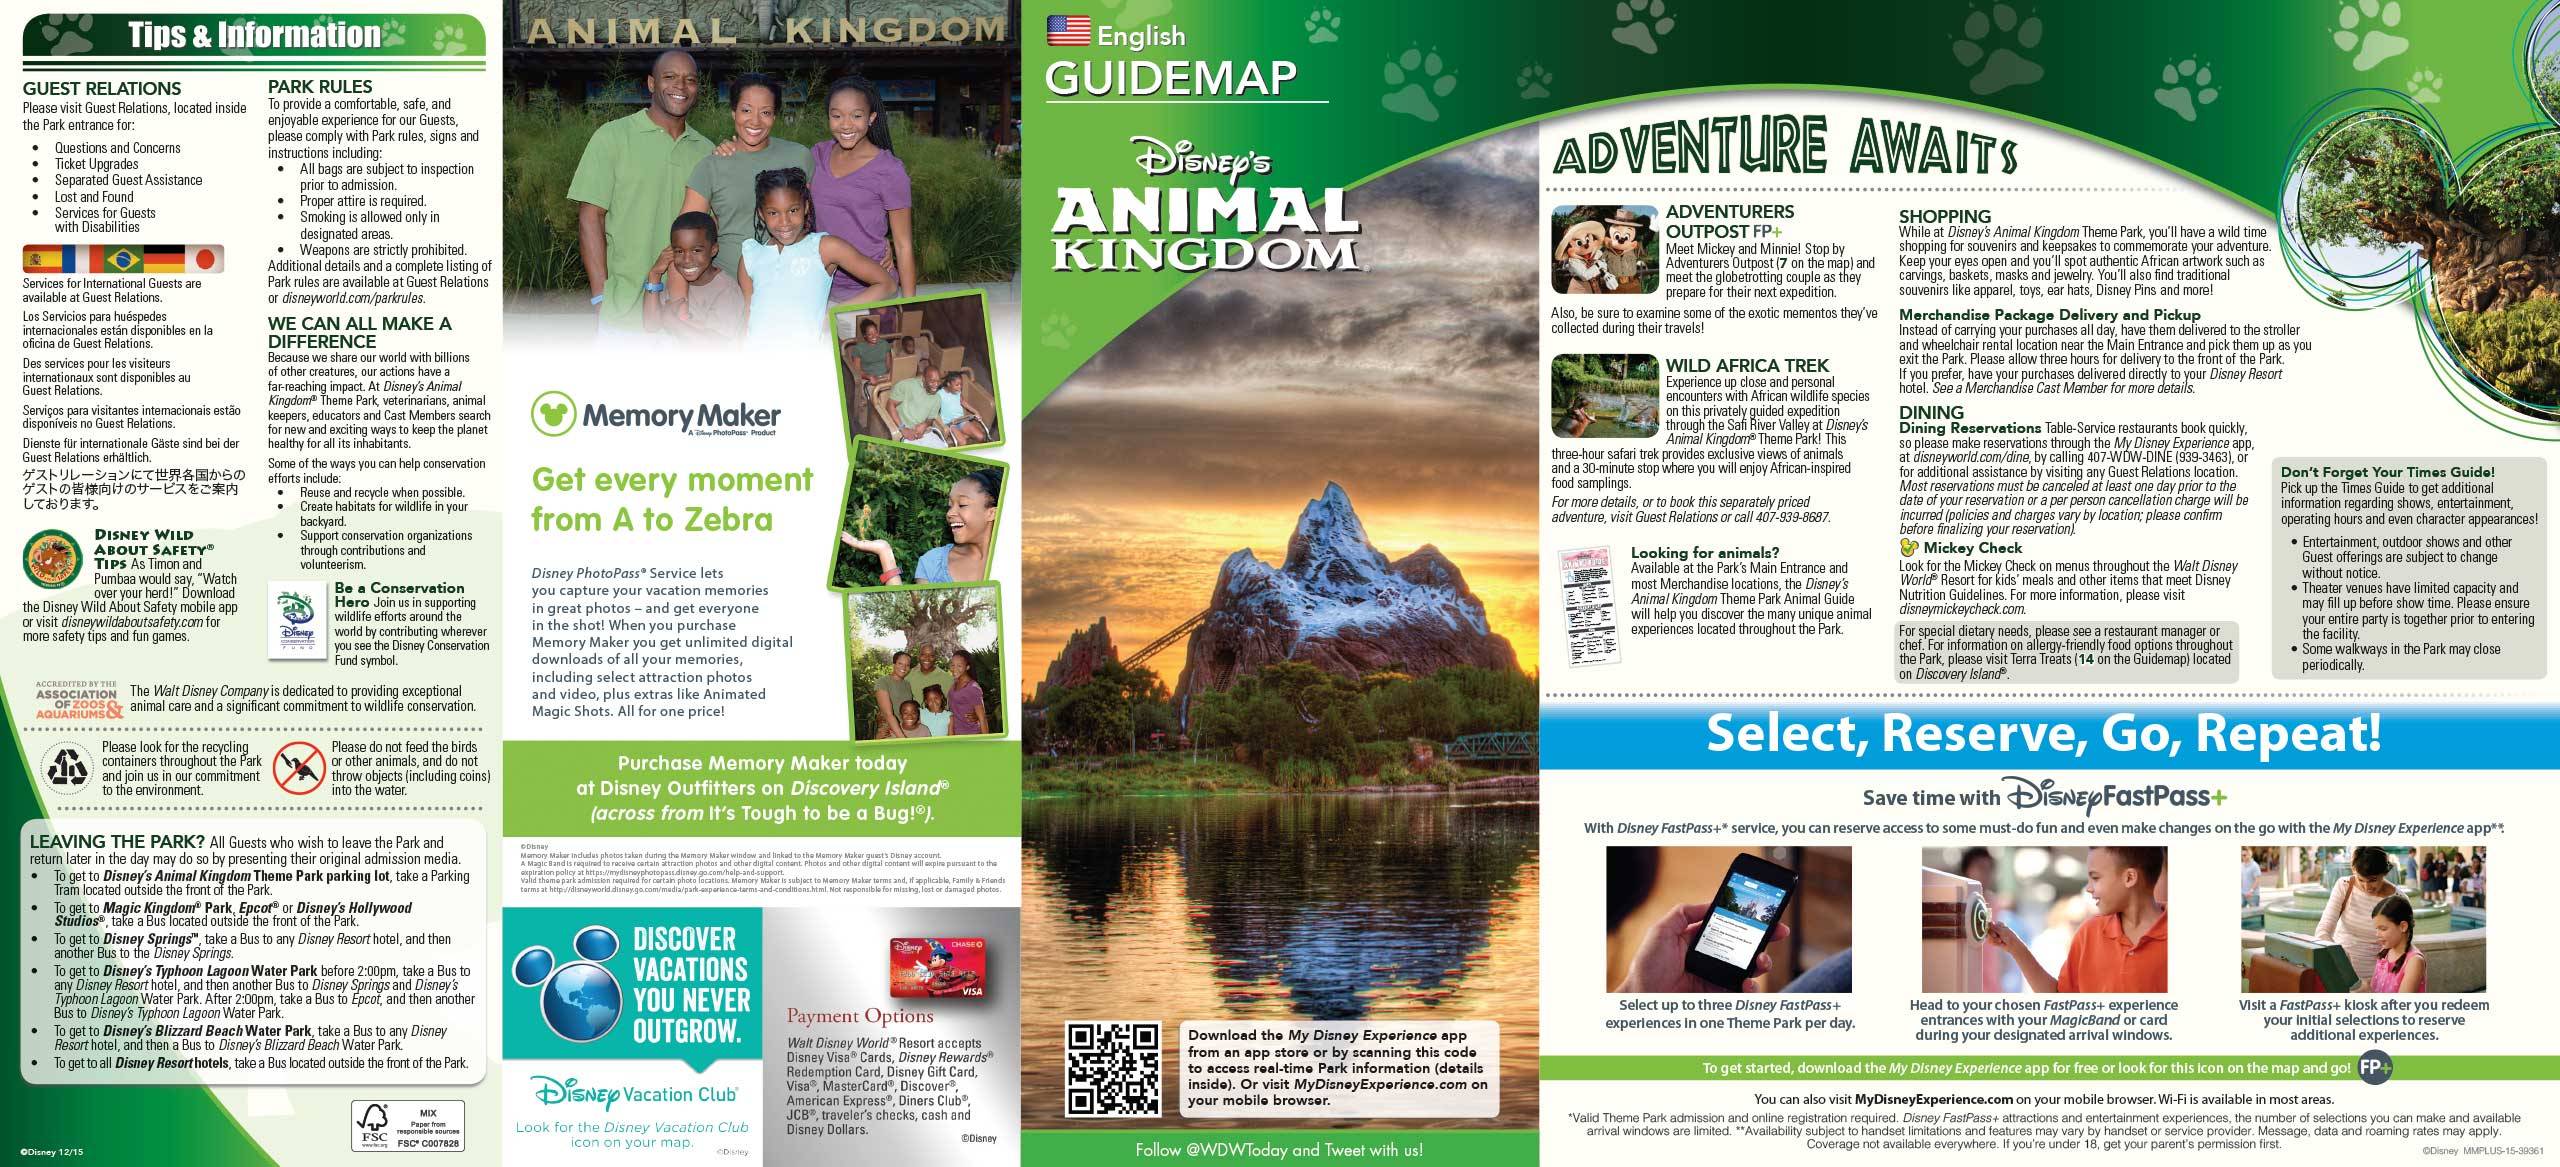 Disney's Animal Kingdom Guide Map January 2016 - Front